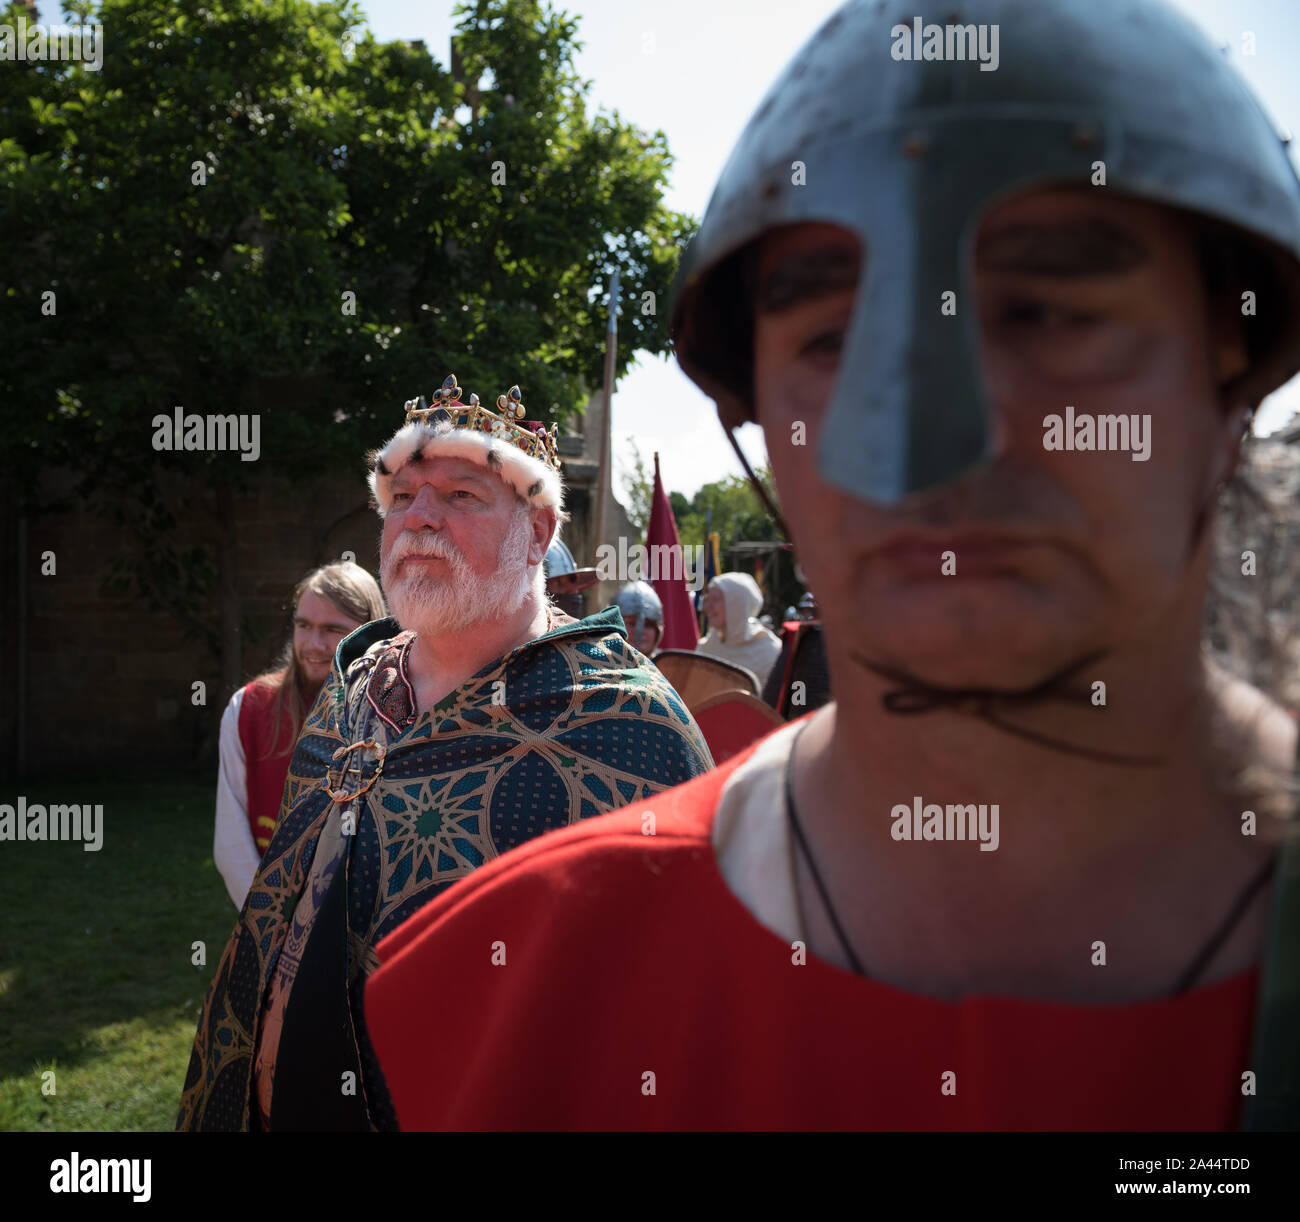 Evesham, Worcestershire, UK. 8th August, 2015. Pictured: King Henry III played by re-enactor John Watson awaits to take part in the Grand Parade Stock Photo